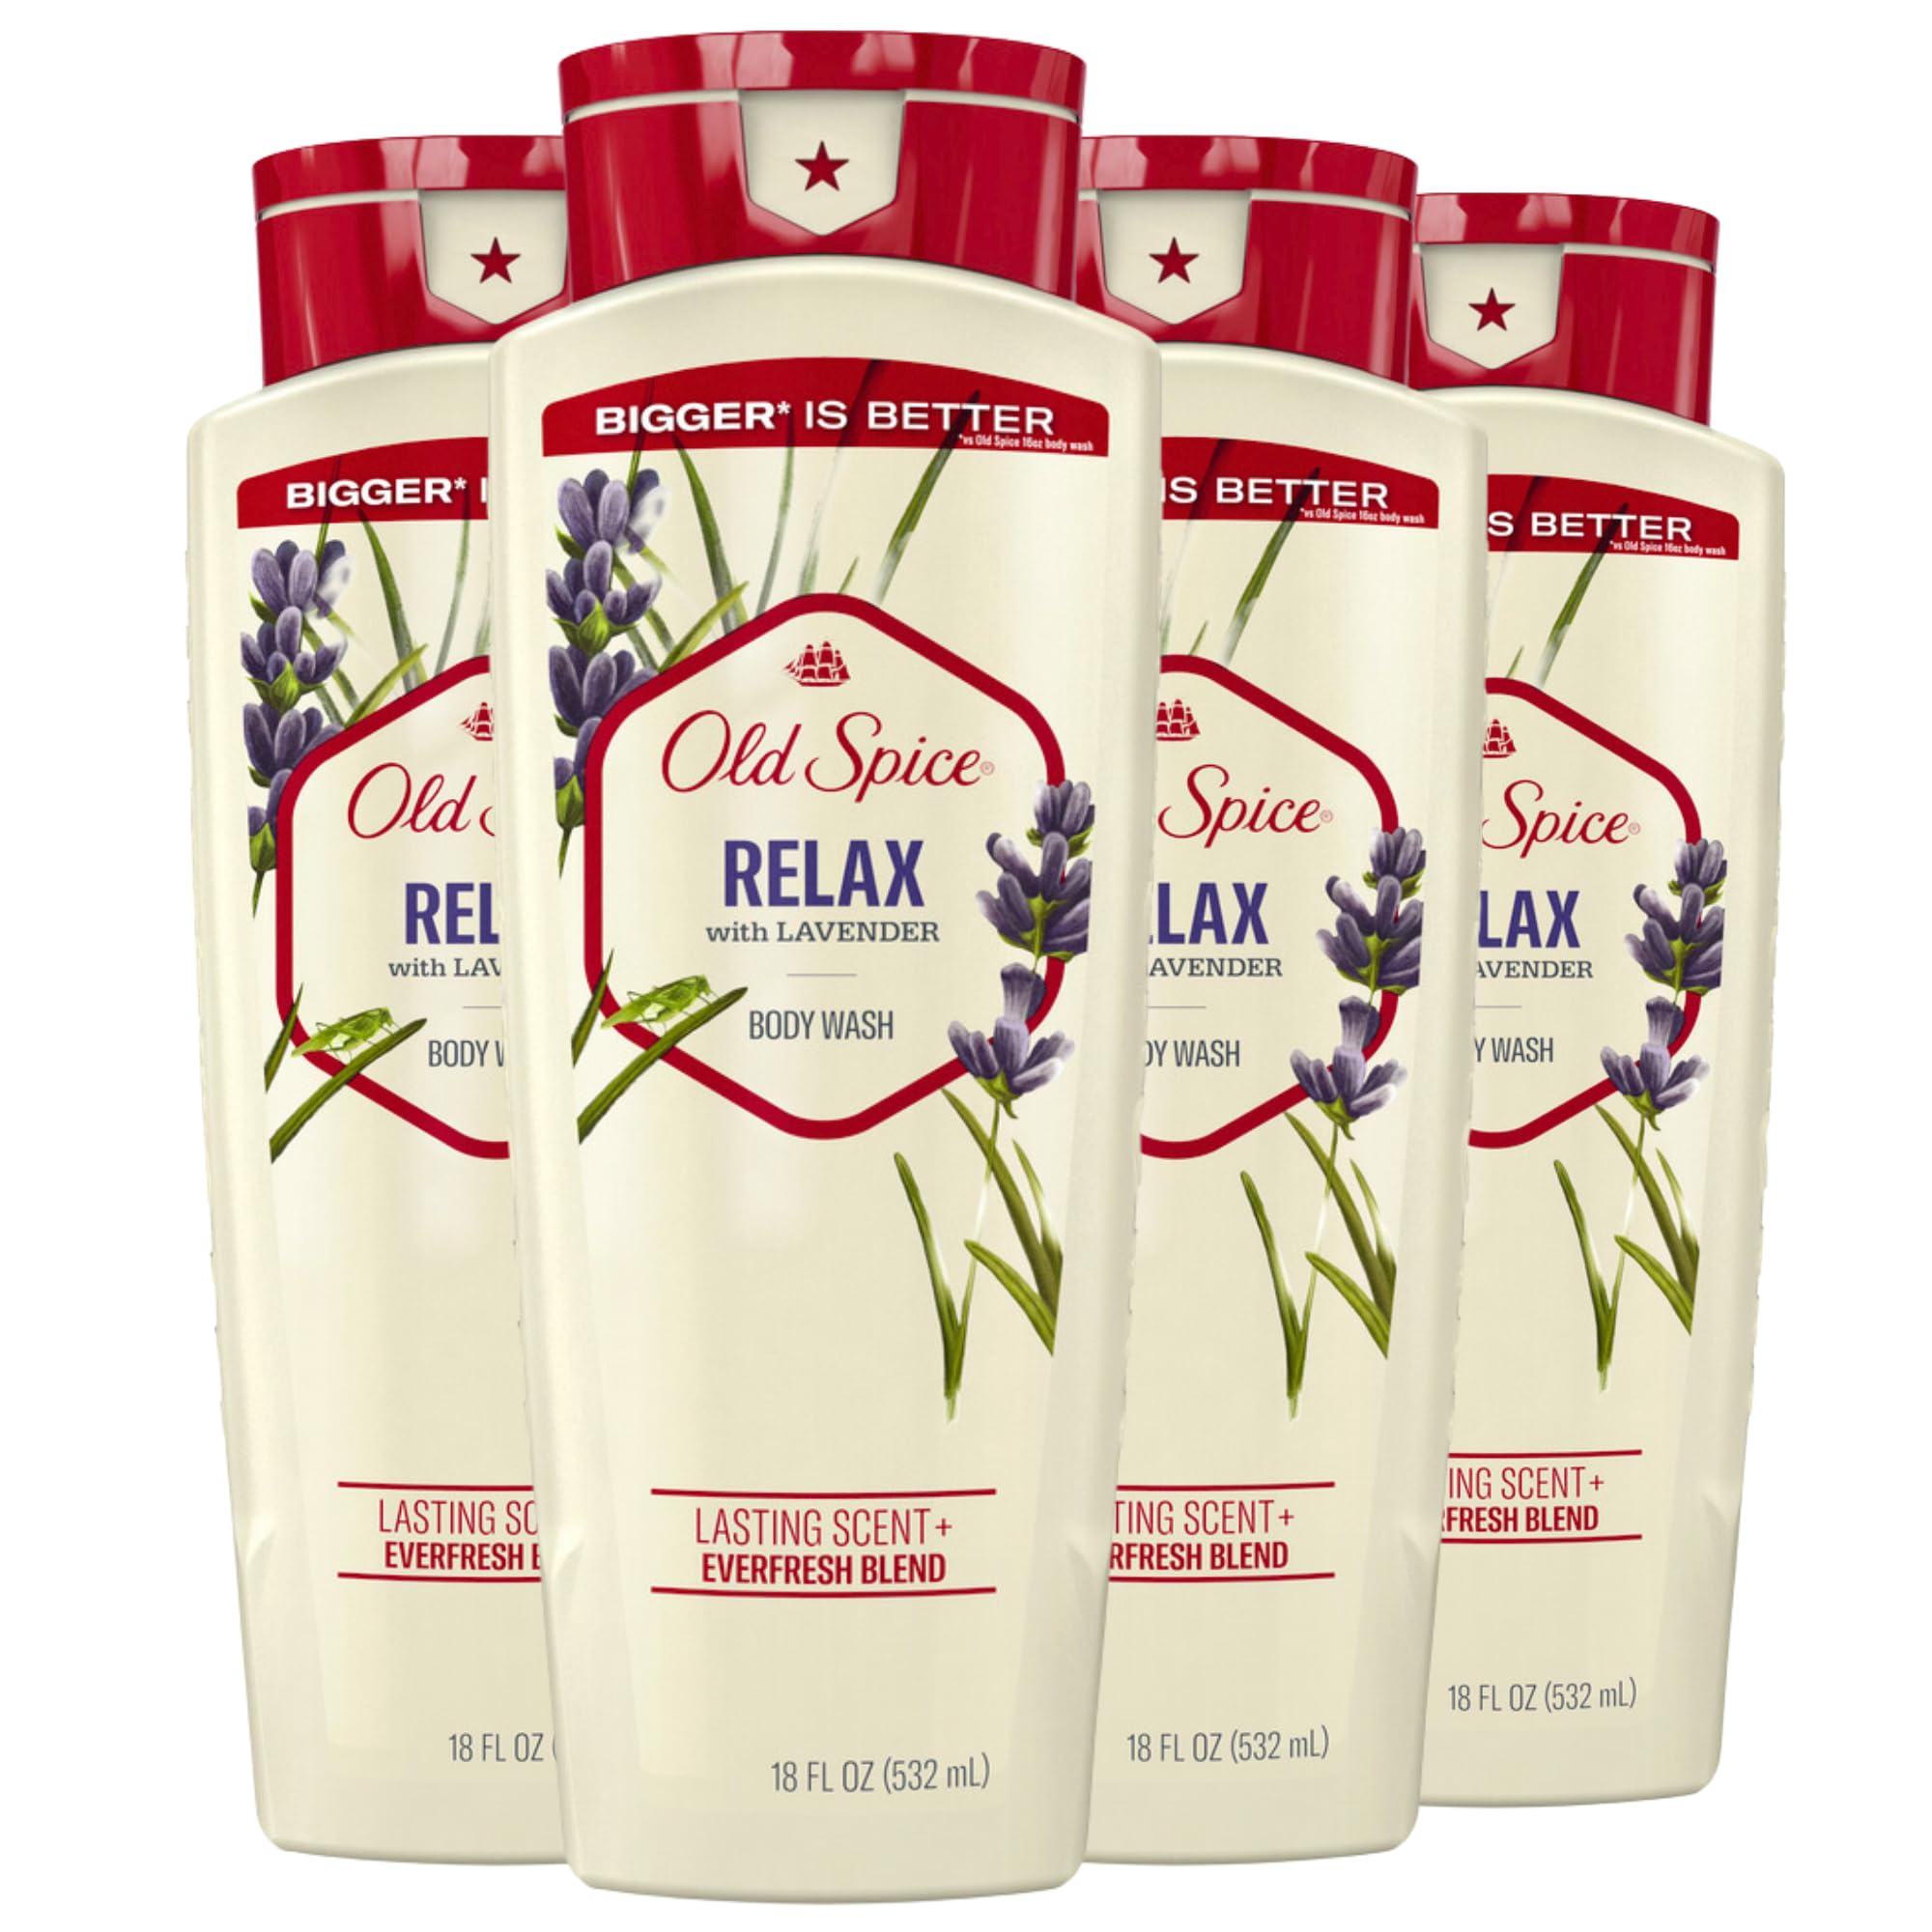 Old Spice Men's Body Wash Relax with Lavender, 18 fl oz (Pack of 4)